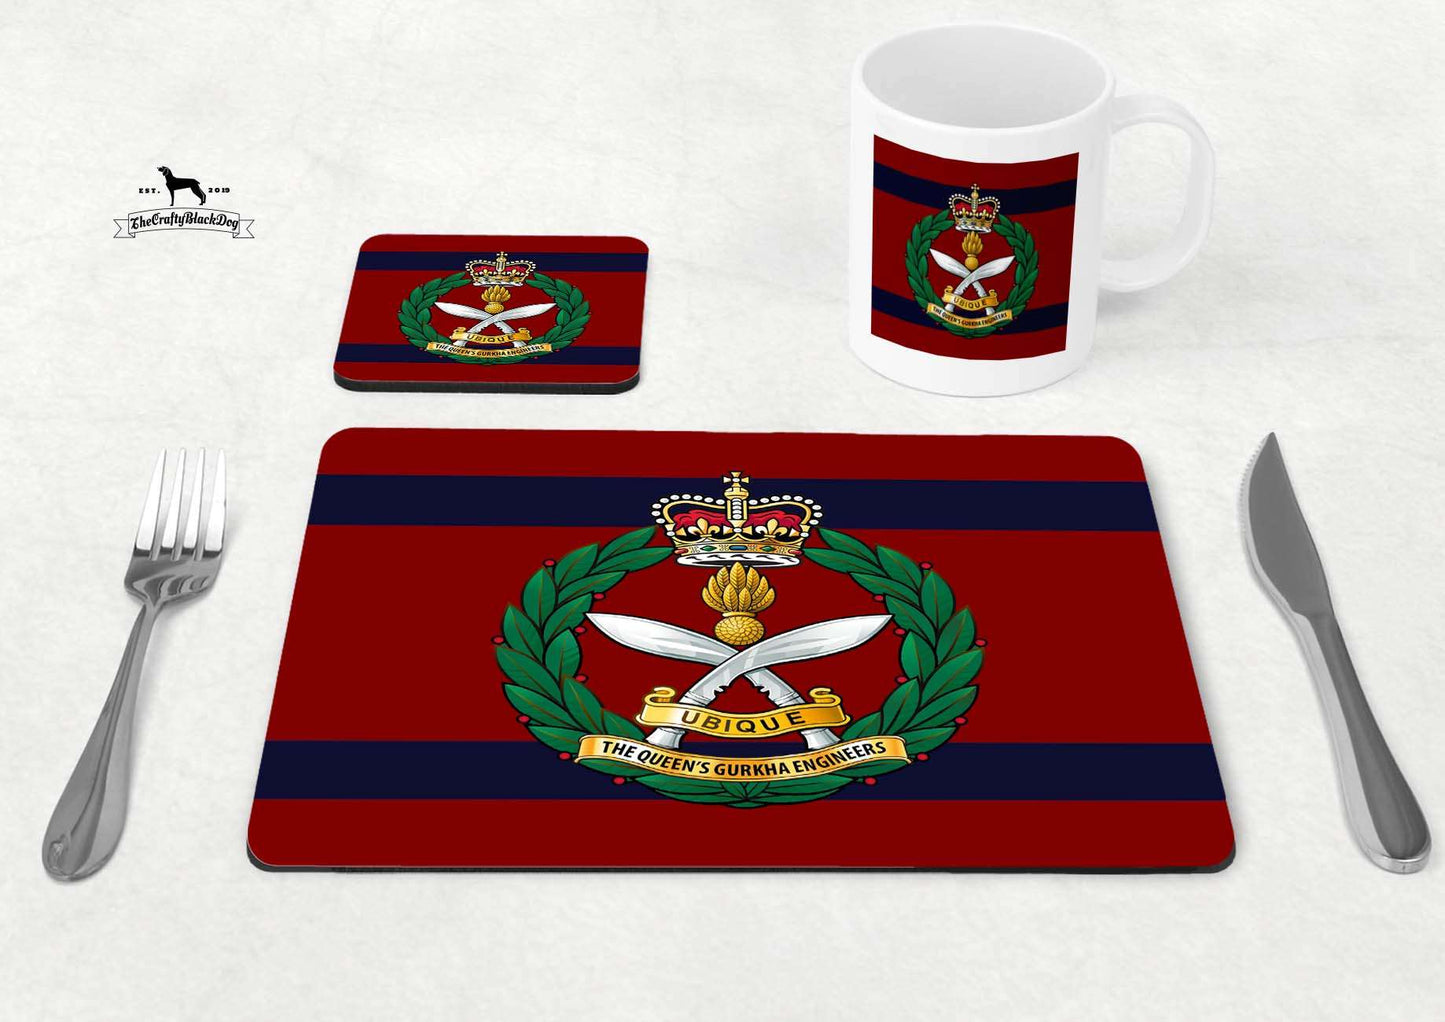 Queen's Gurkha Engineers - Table Set (King's New Crown)